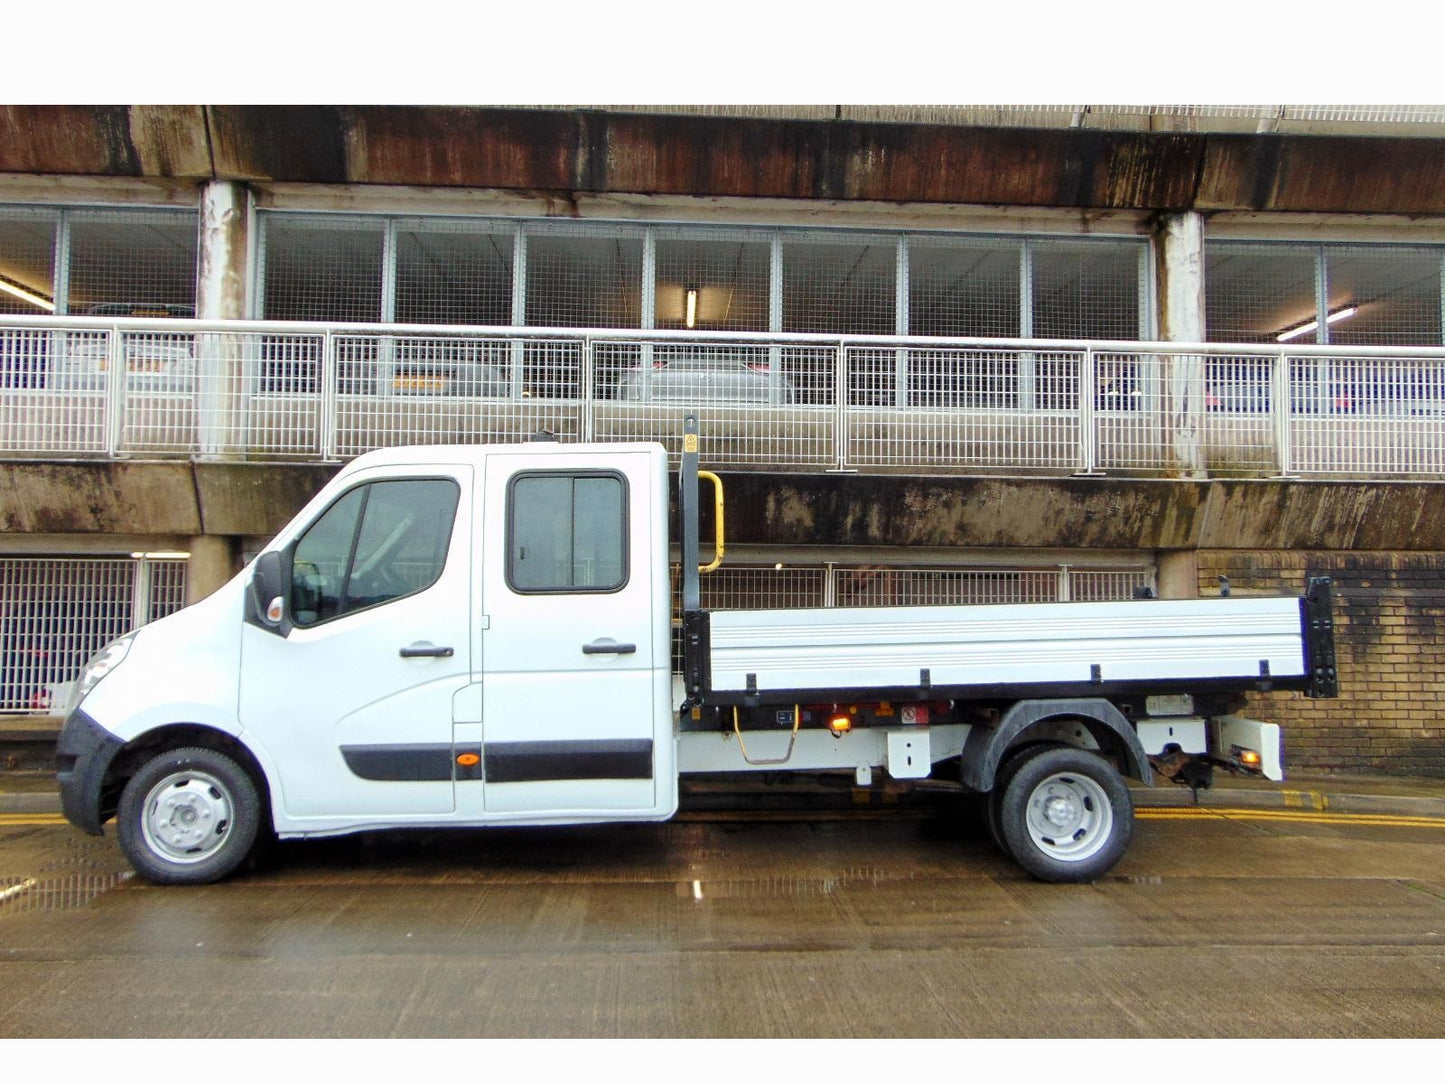 Bid on RENAULT MASTER 2016 TIPPER: CREW CAB, 7 SEATS, TOW BAR, 63K MILES- Buy &amp; Sell on Auction with EAMA Group